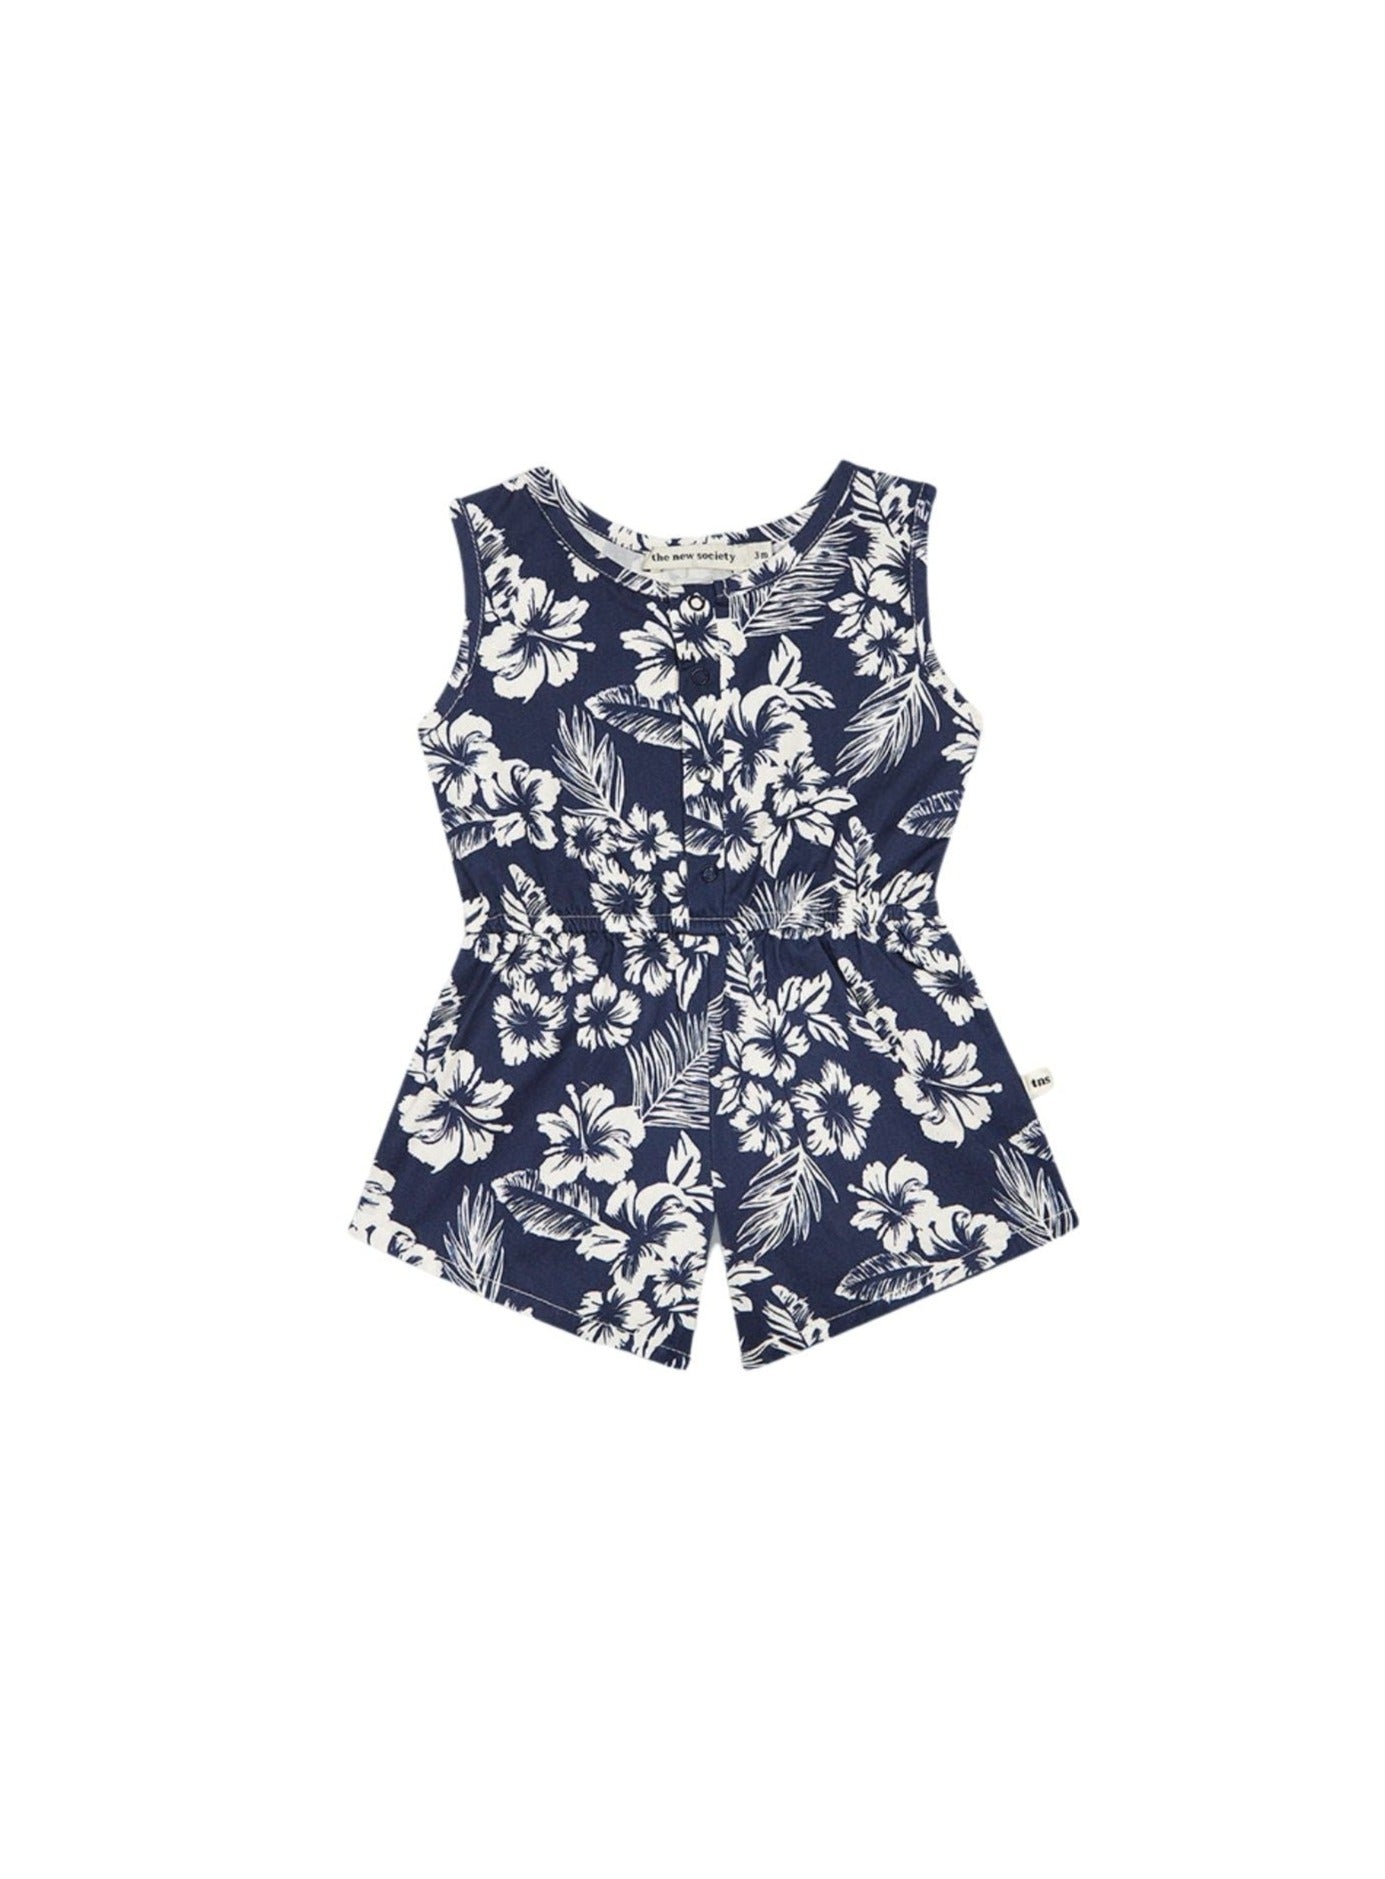 Hibiscus baby Romper Baby Grows The New Society 